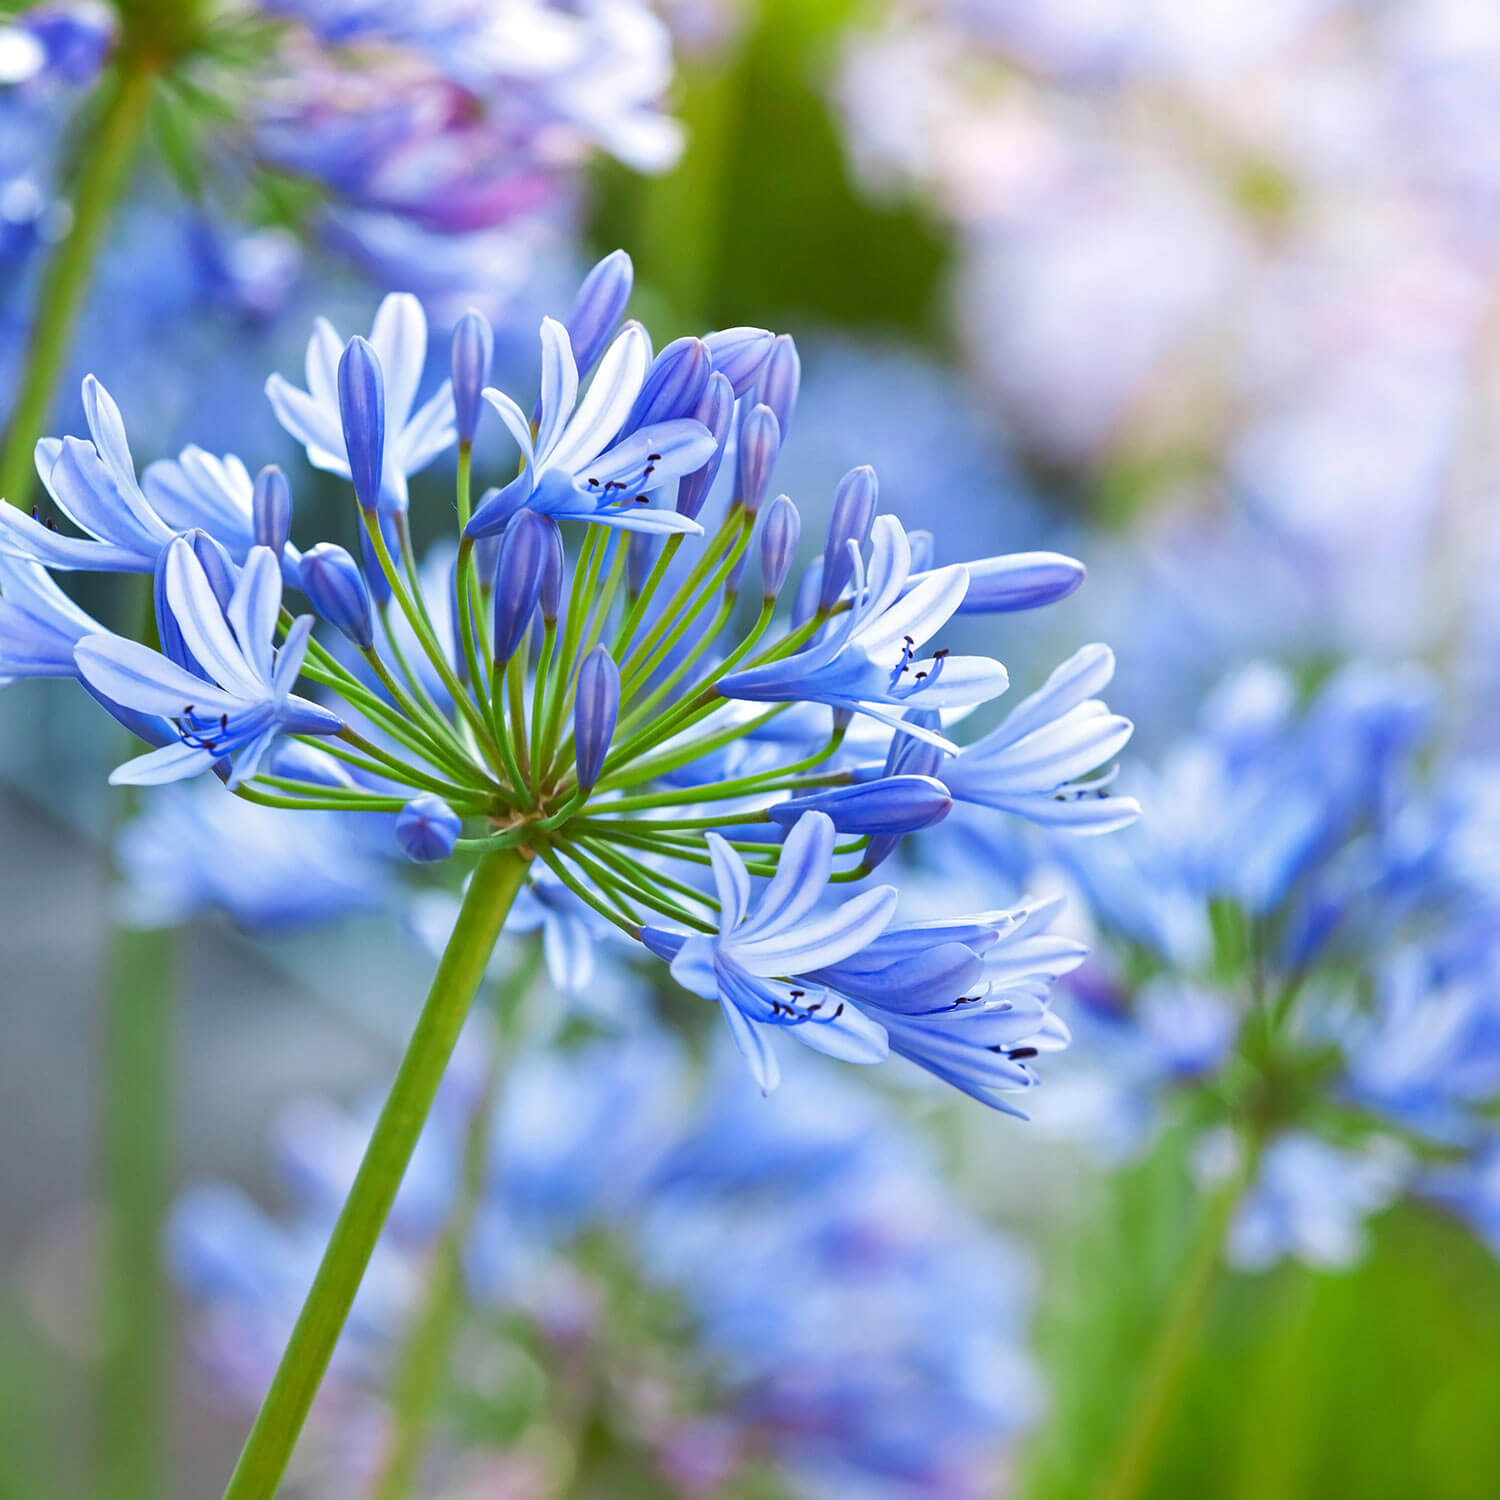 Agapanthus 'Tinkerbell' (Blue Lily-of-the Nile